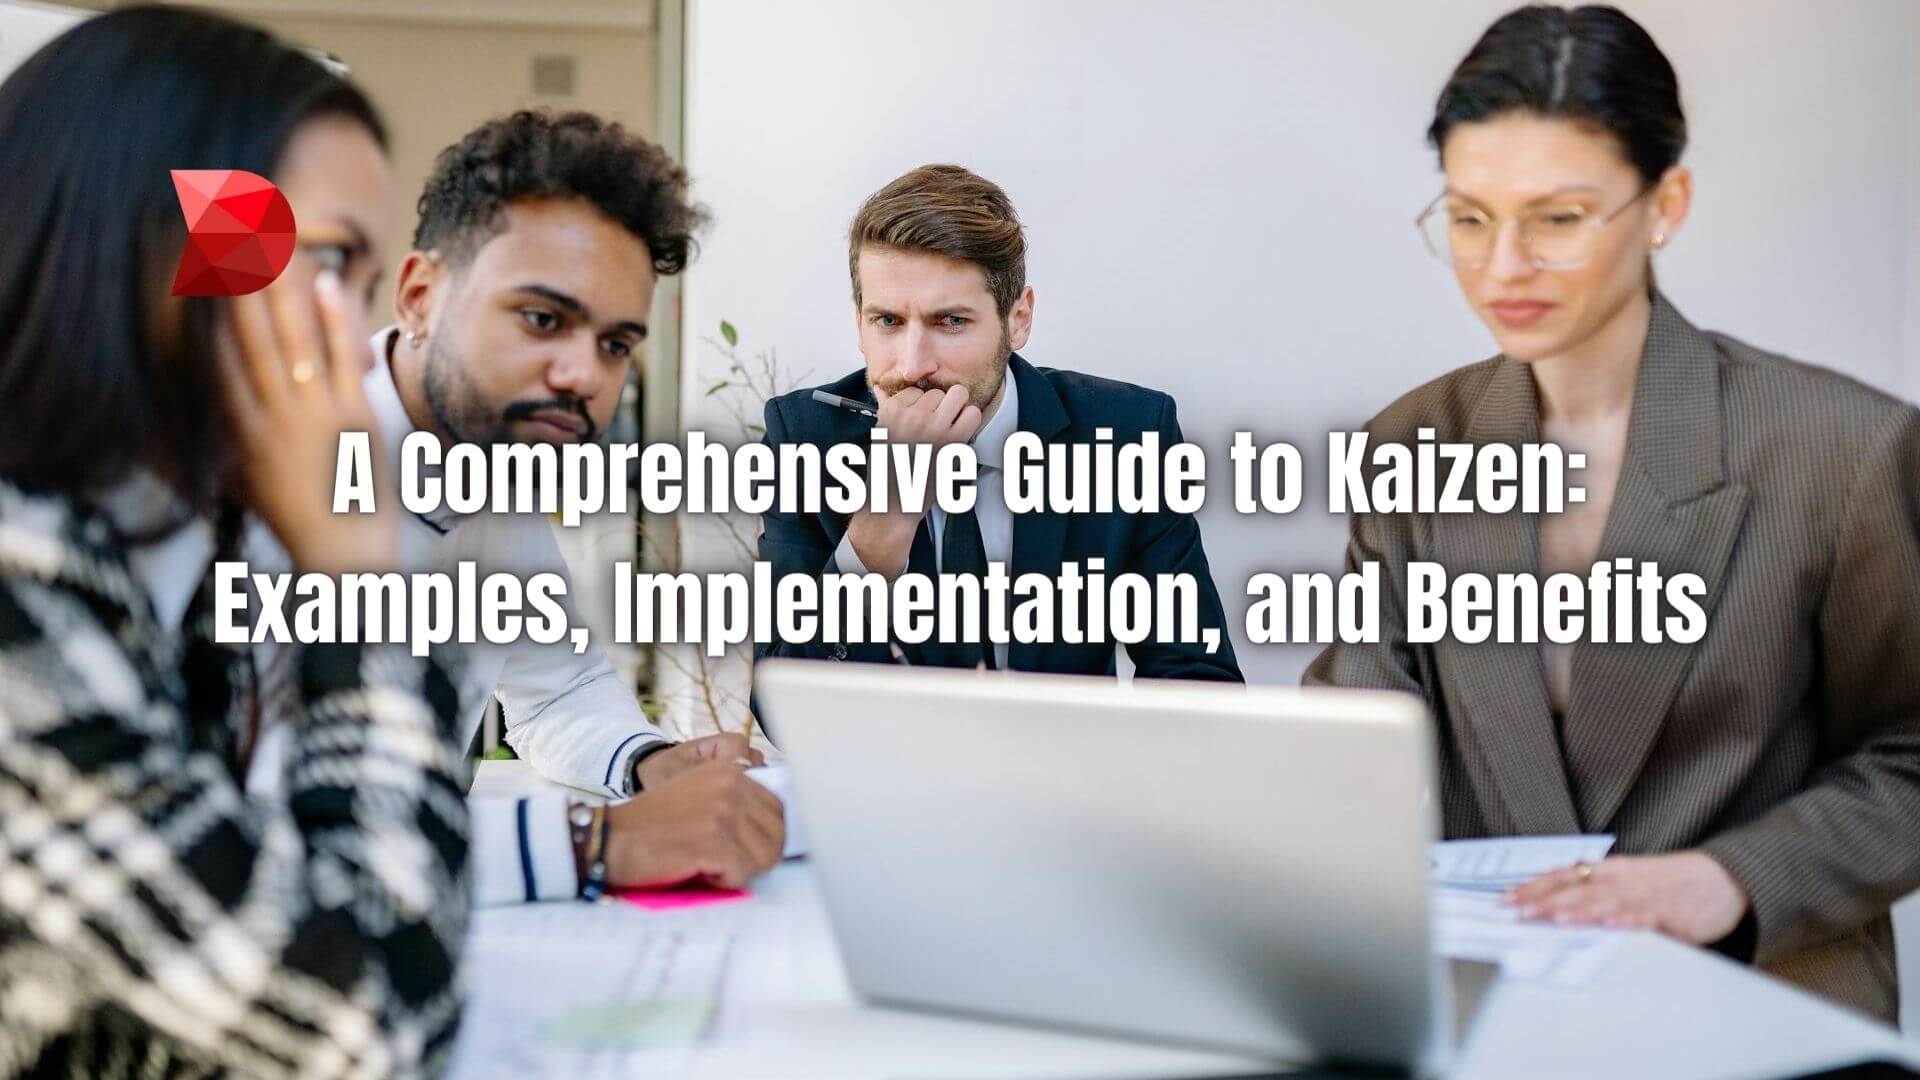 Elevate your processes today! Unlock the power of continuous improvement with our guide to Kaizen examples, implementation, and benefits.